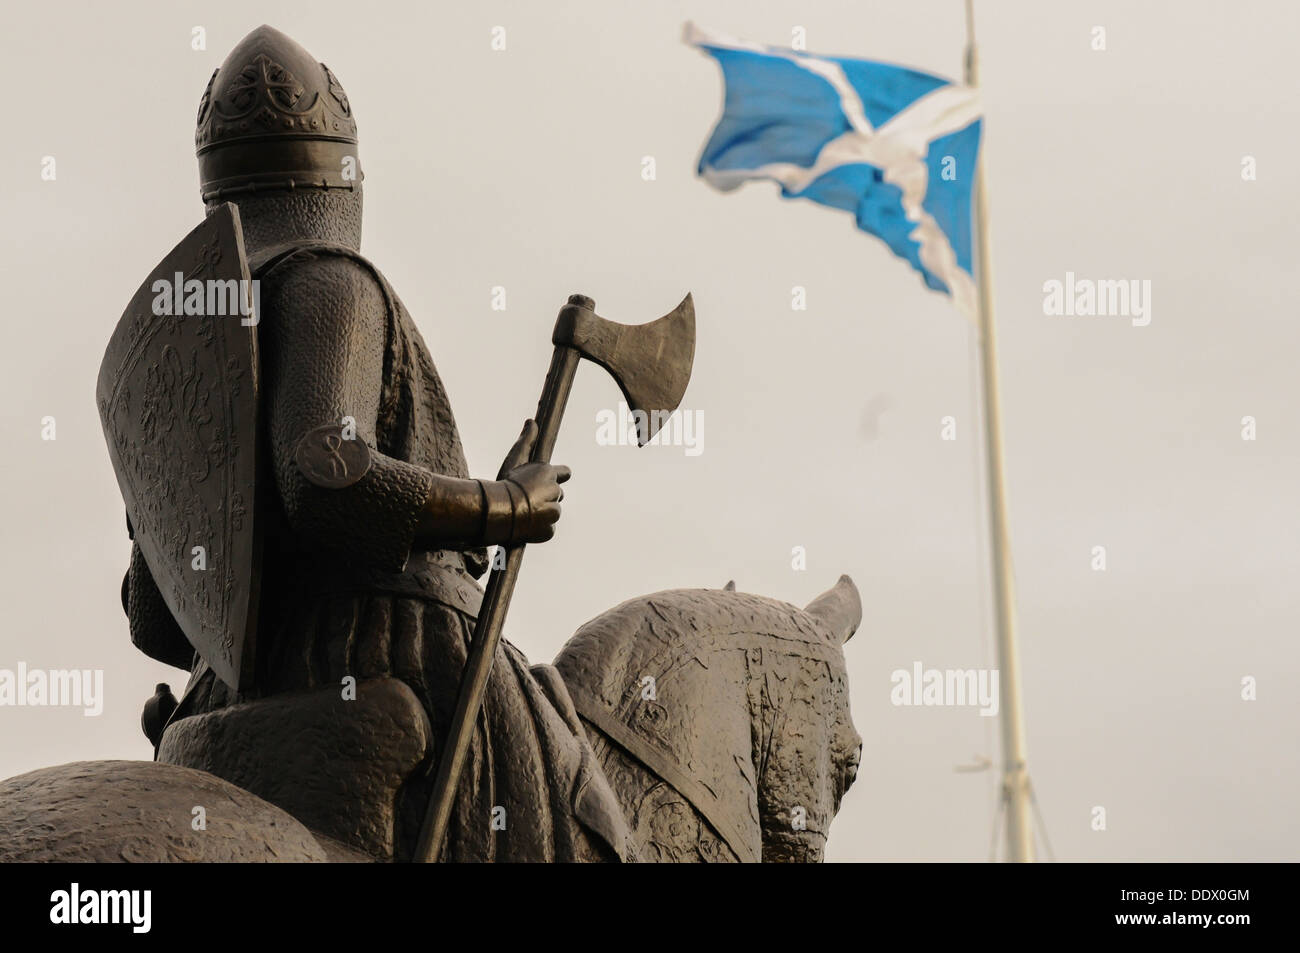 Statue of King Robert the Bruce at the Heritage Centre, Bannockburn, Stirling, Scotland, UK. Silhouette of the statue. Stock Photo